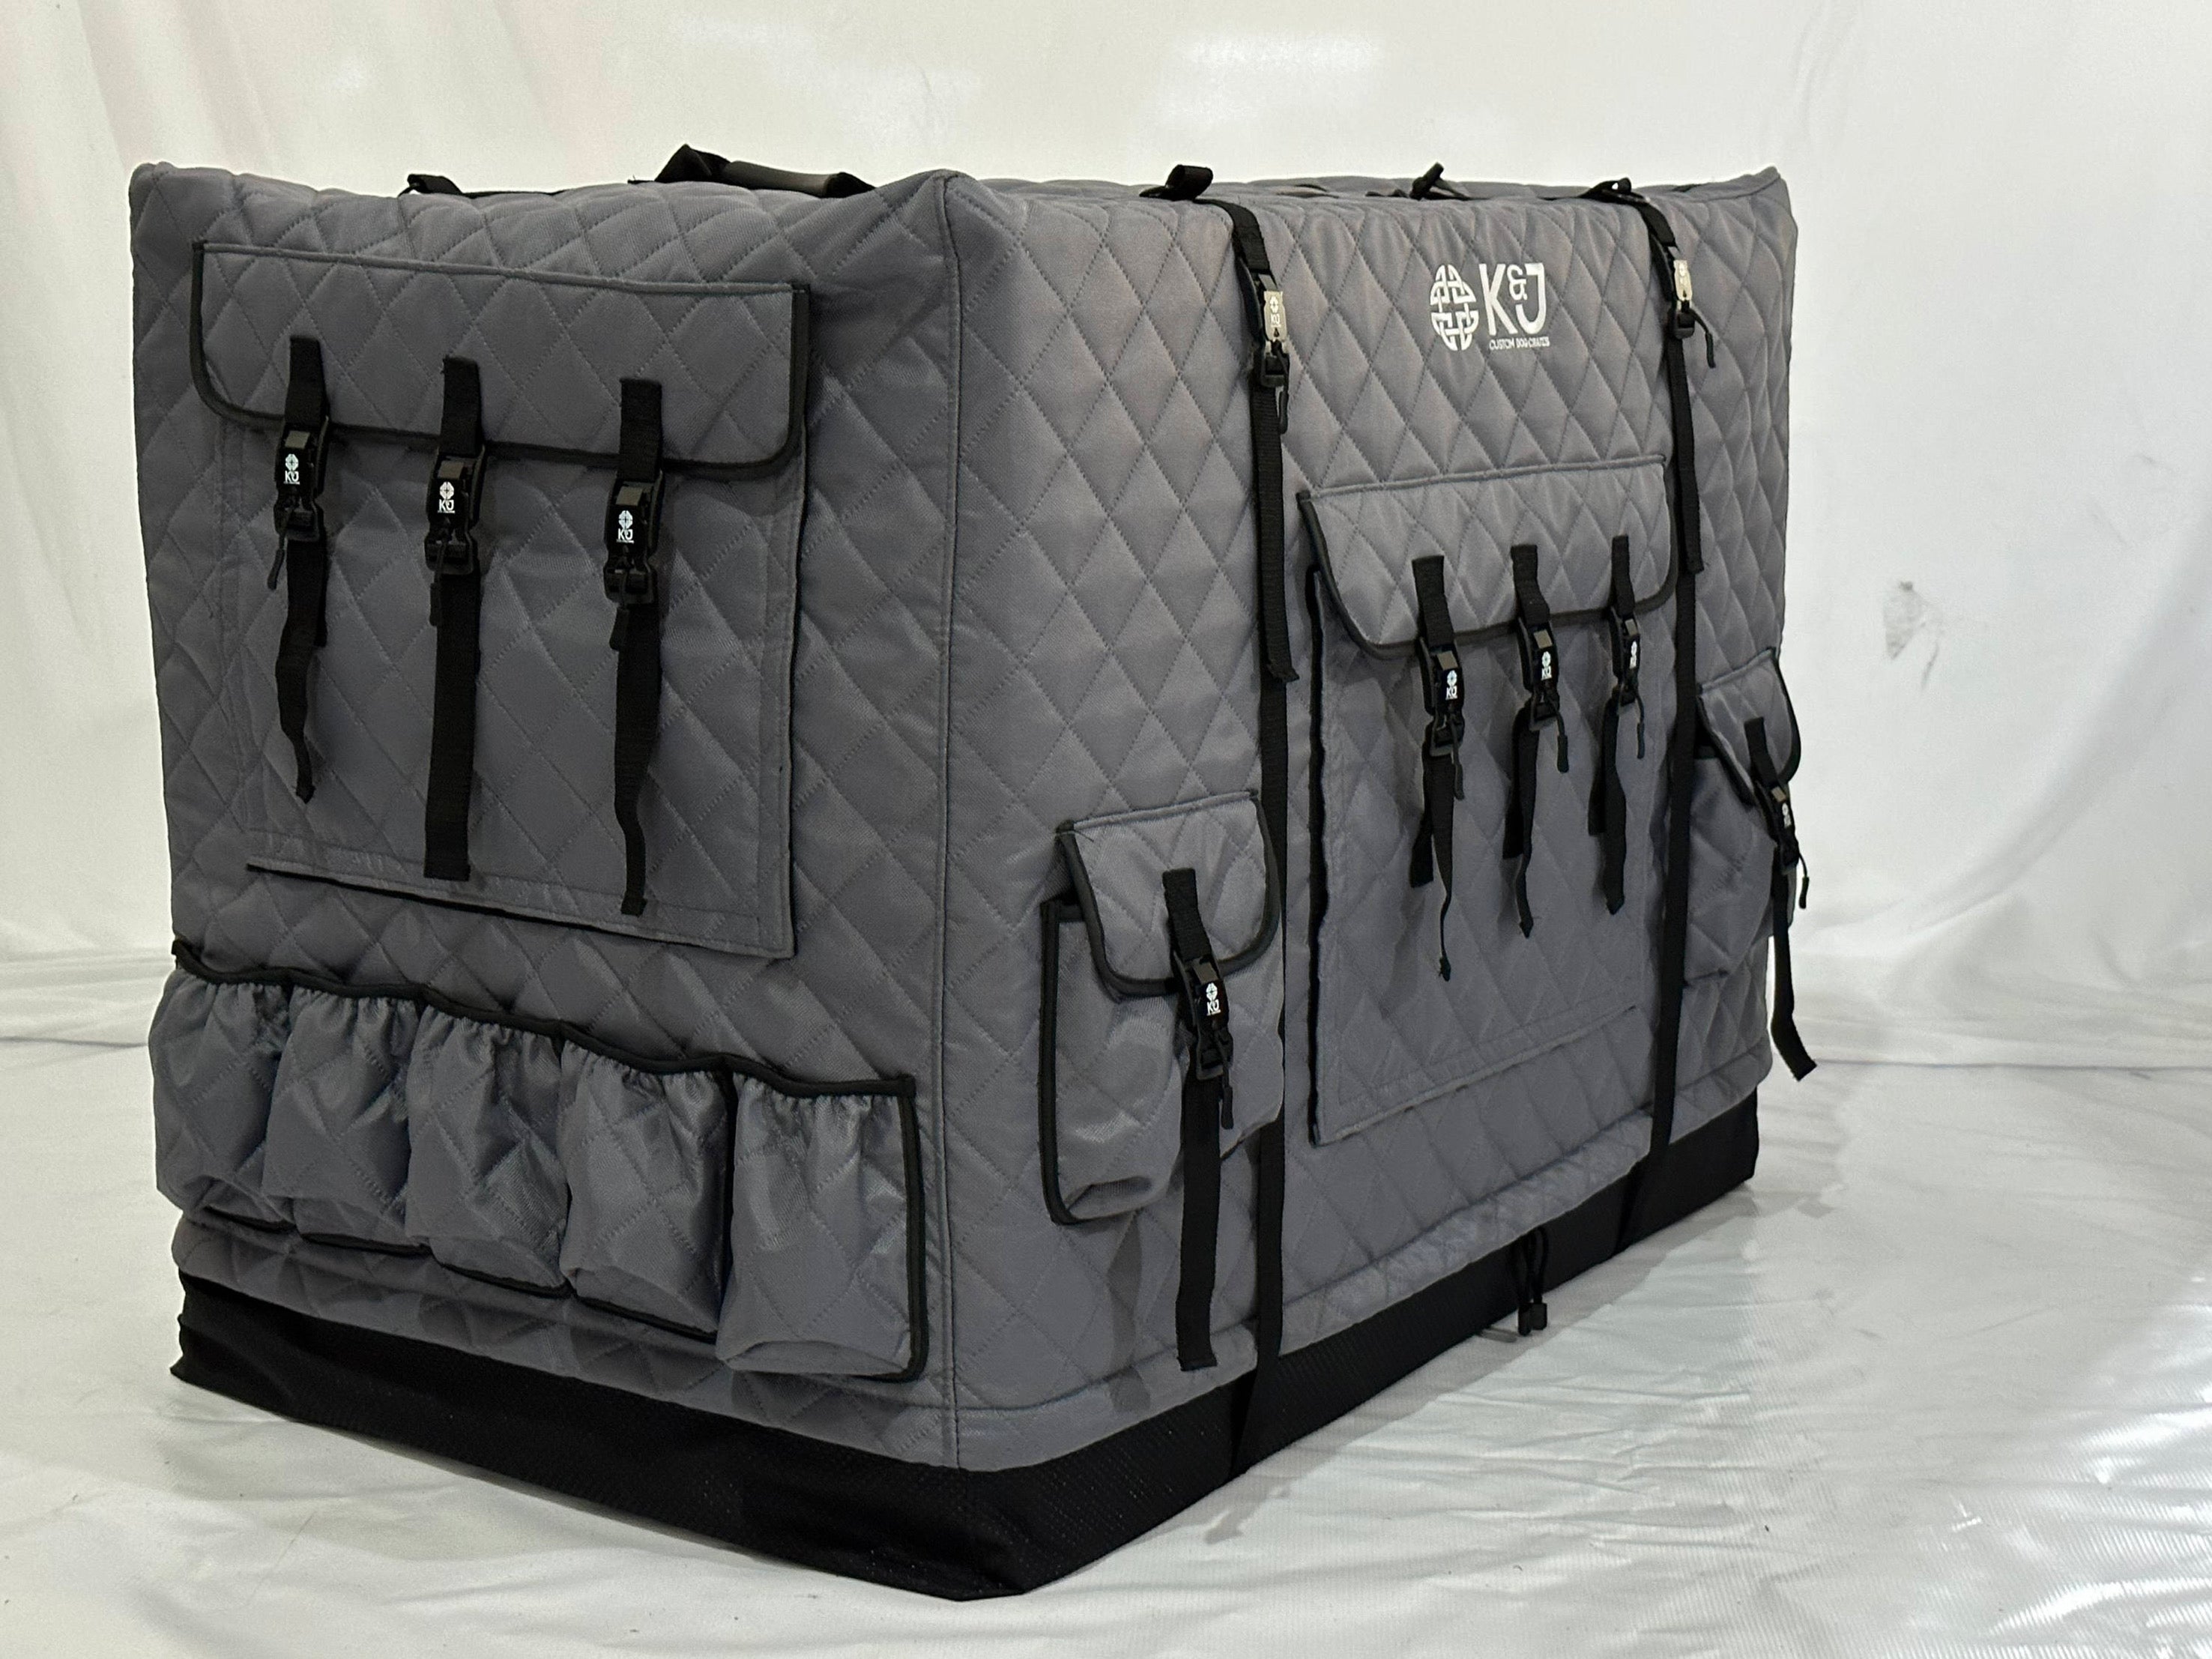 Insulated Crate Covers